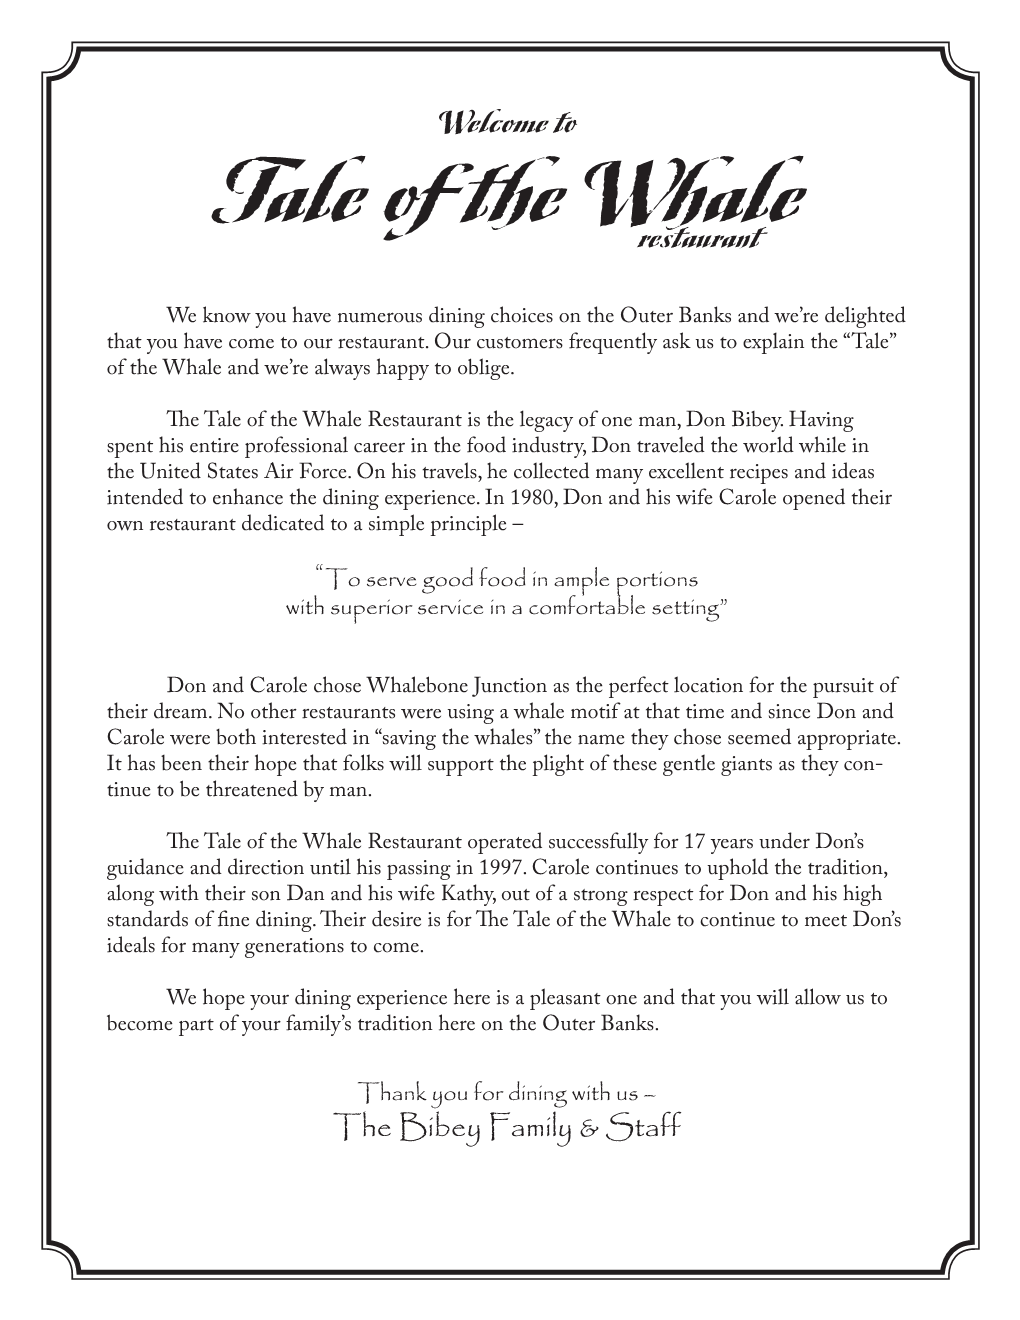 Tale of the Whale Restaurant